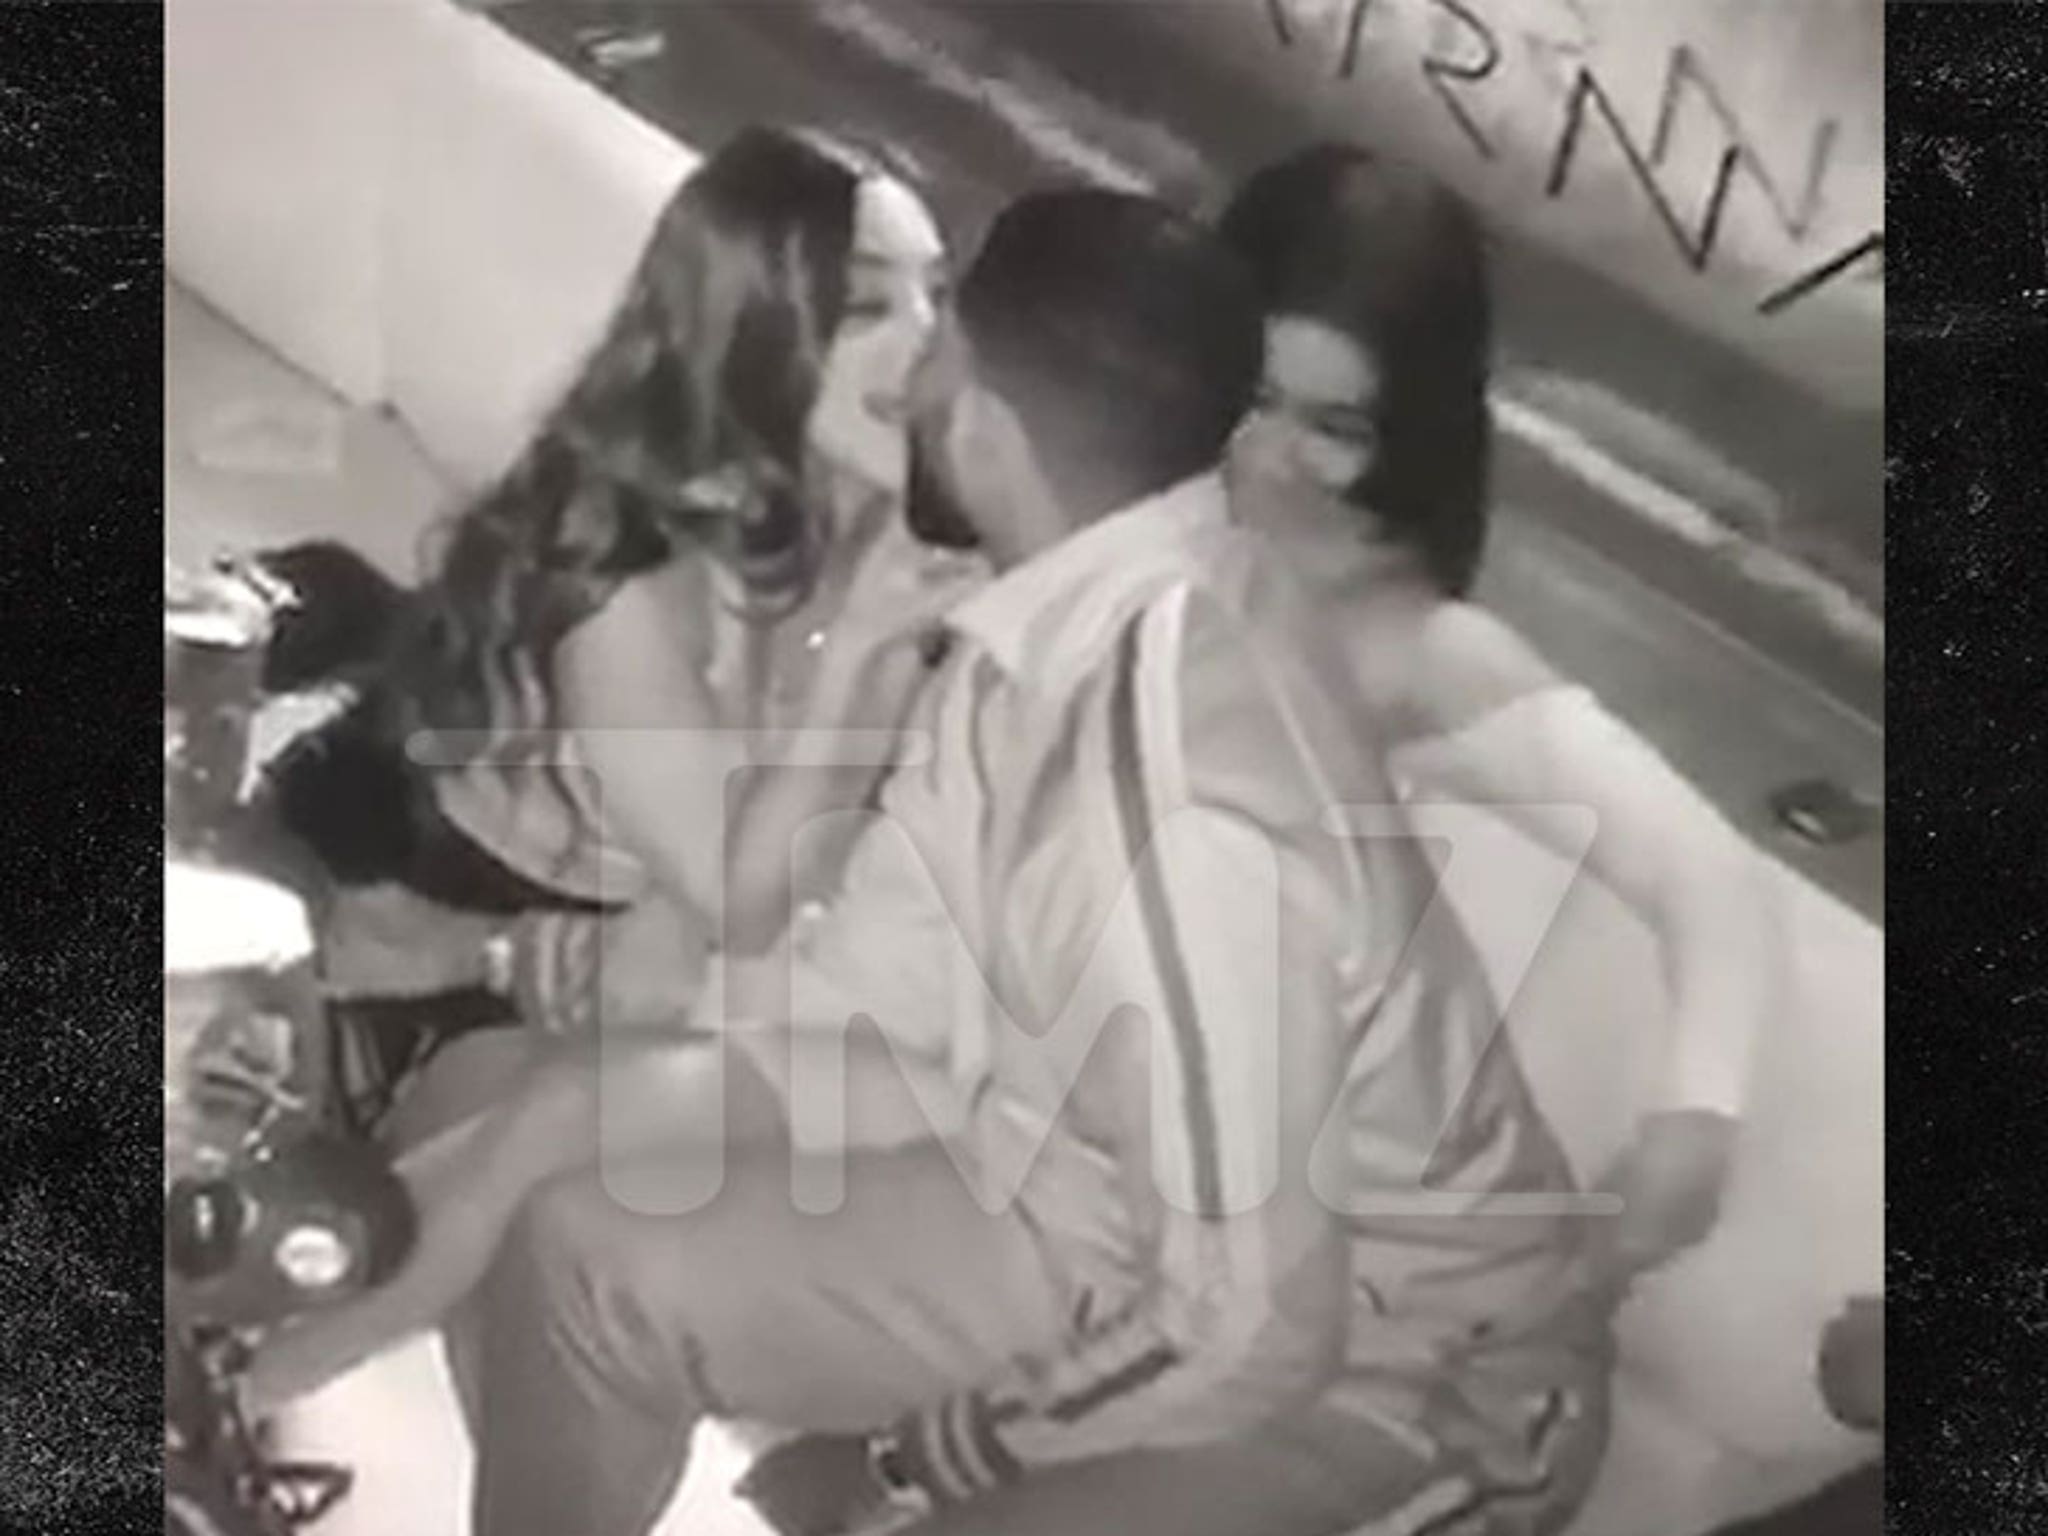 Tristan Thompson Cheating on Khloe Kardashian with 2 Women in New Video